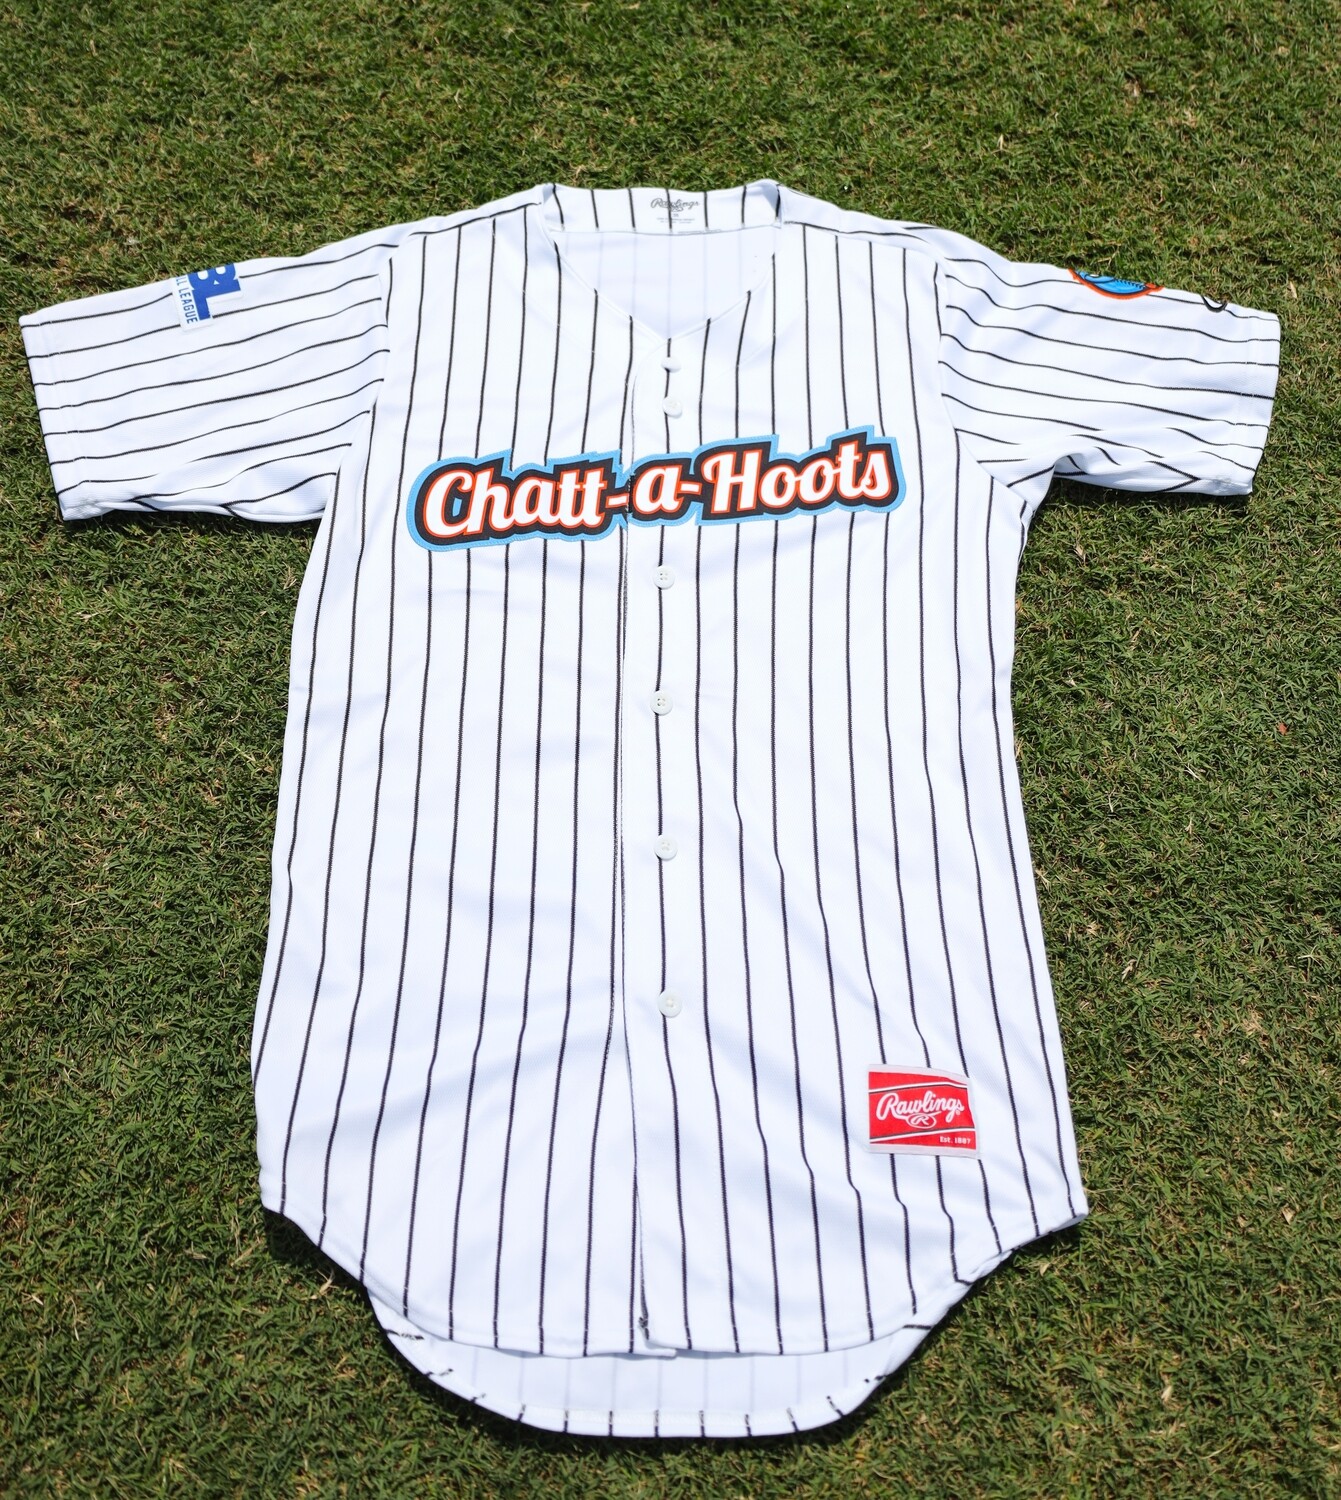 Men's Authentic Chatt-a-Hoots Home Game Jersey